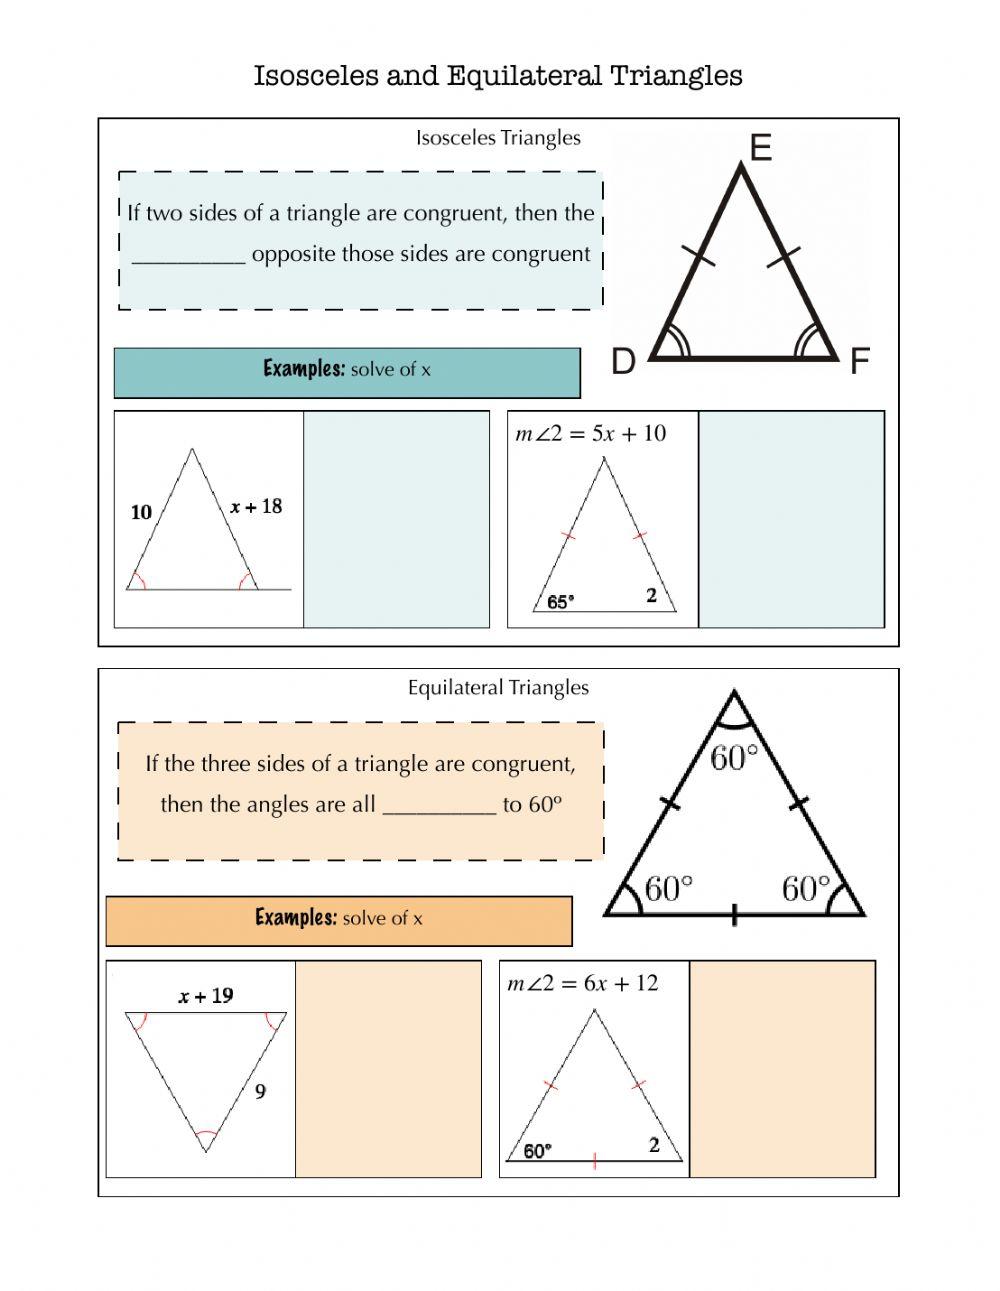 Isosceles and Equilateral Triangles Notes